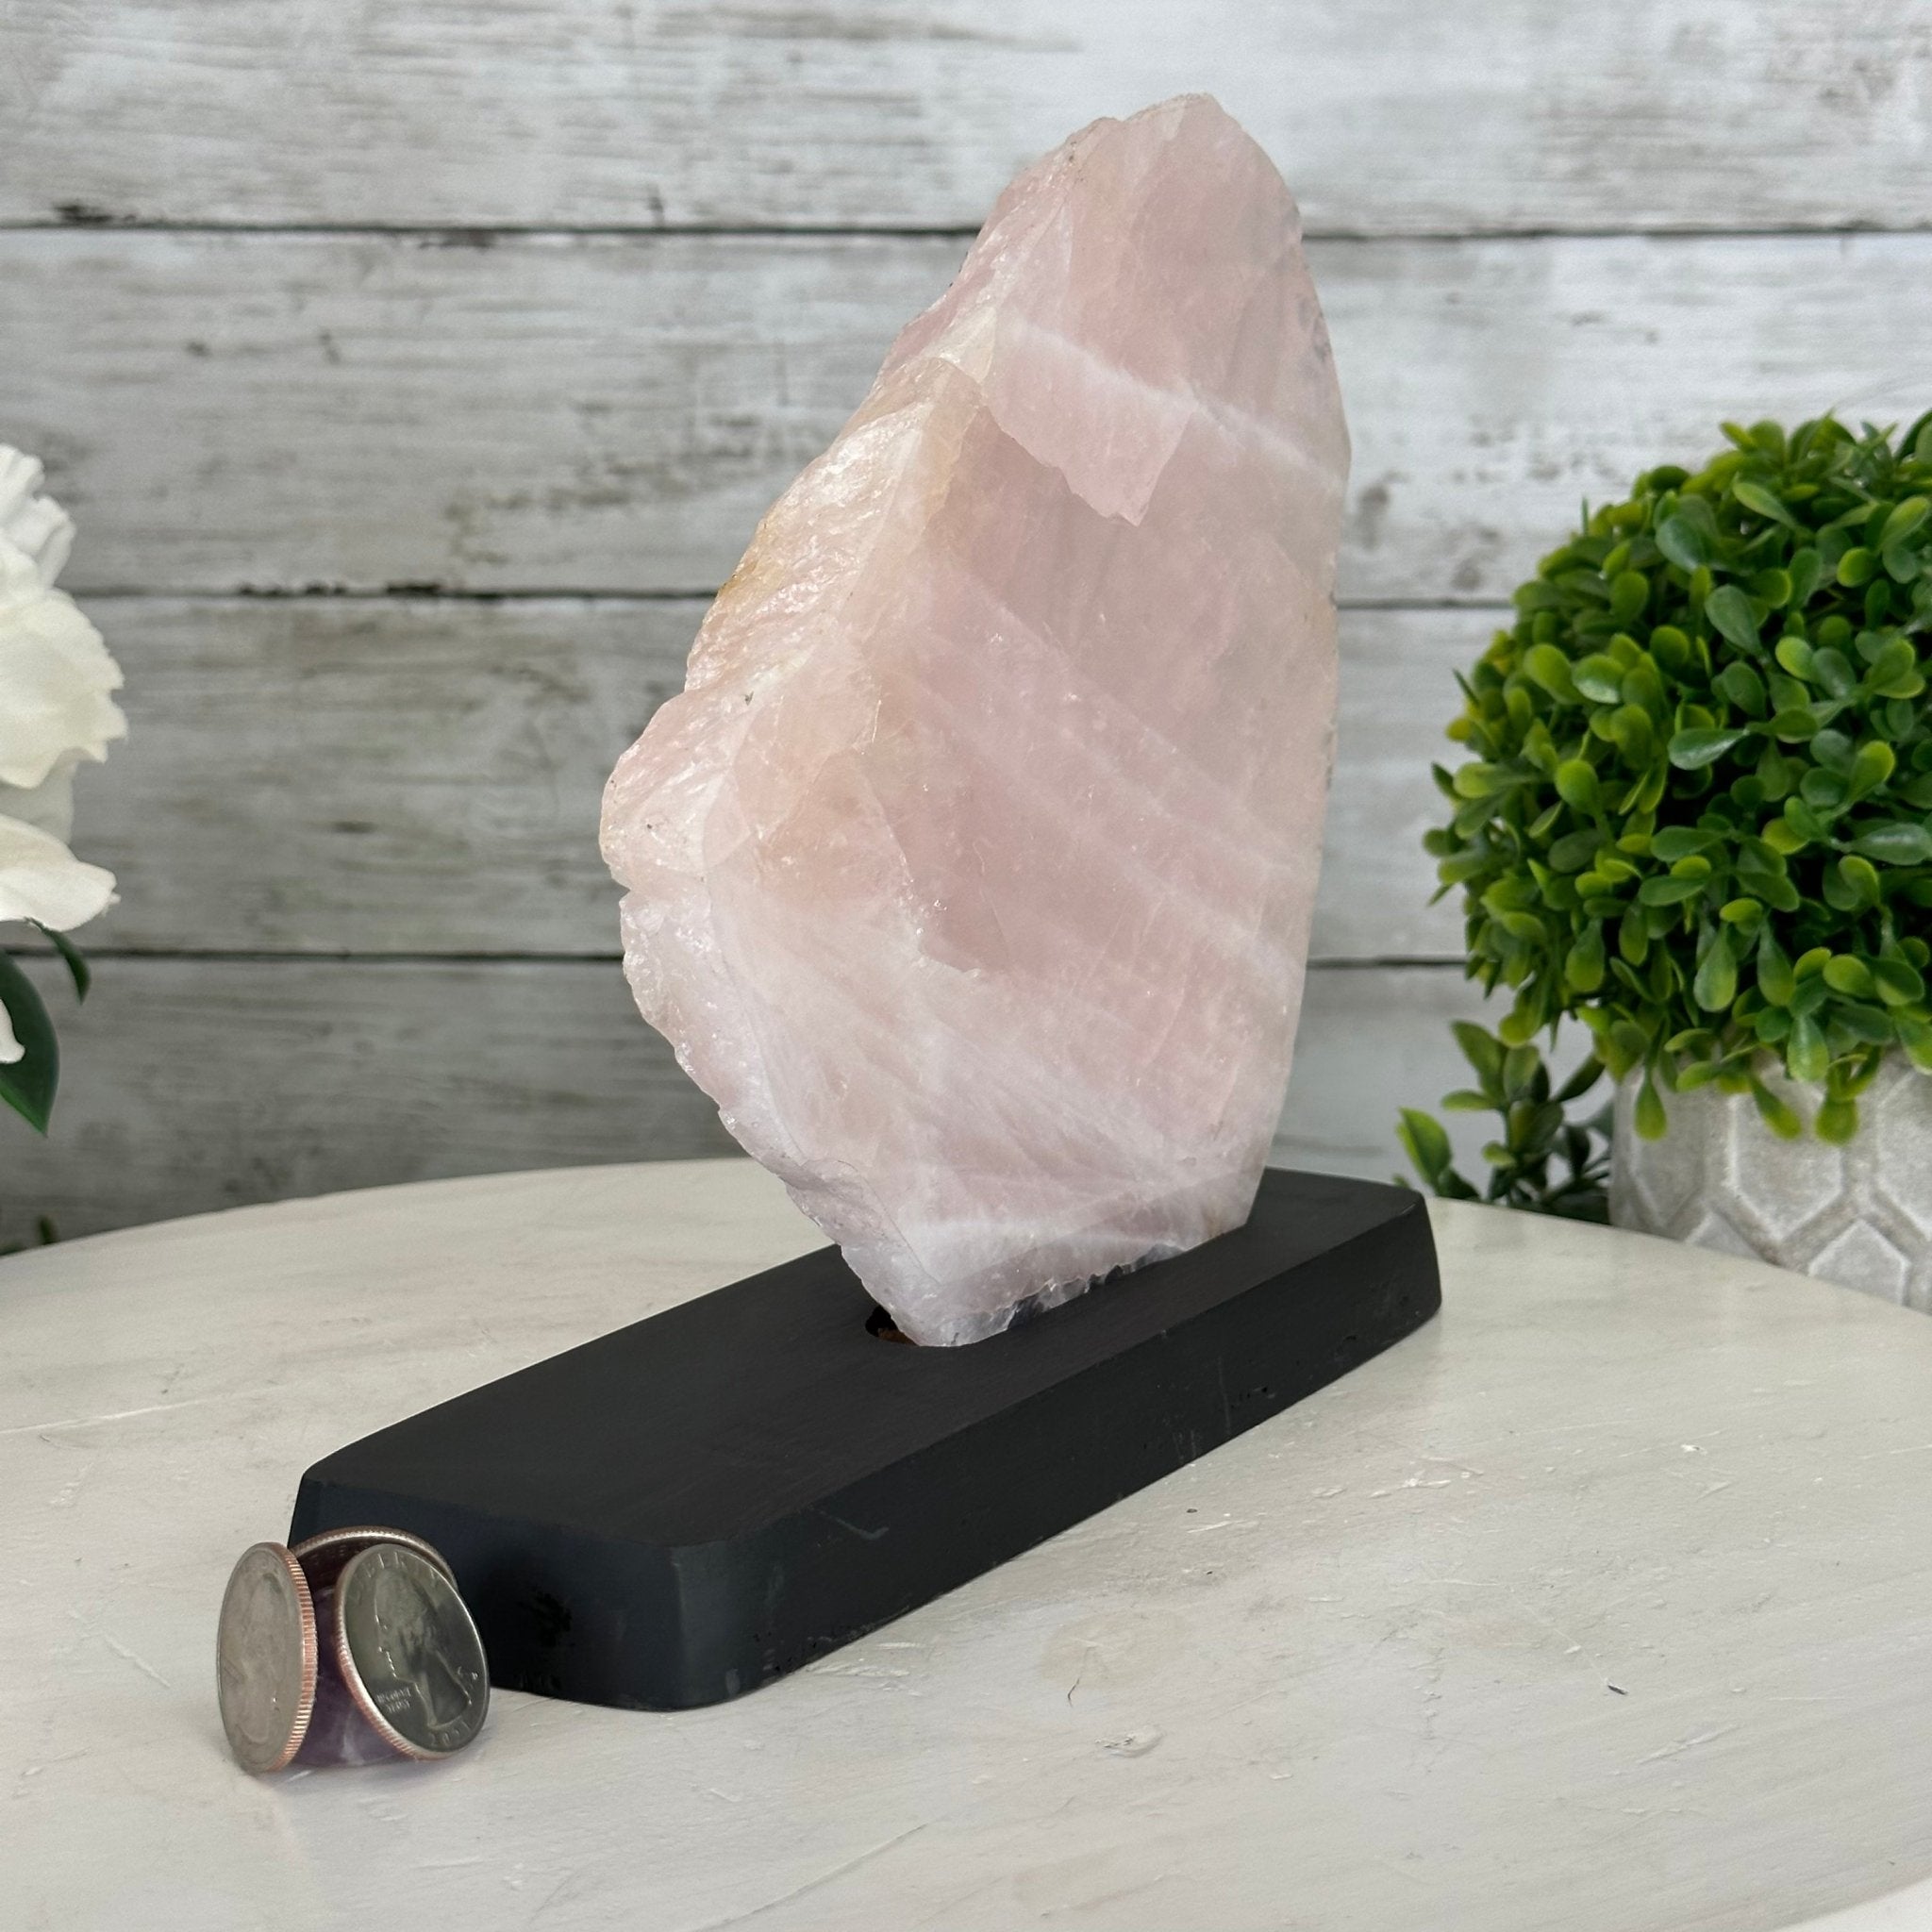 Rose Quartz Polished Slice with Rough Edges on a Wood Base Model 7.5" Tall Model #6100RQ-011 by Brazil Gems - Brazil GemsBrazil GemsRose Quartz Polished Slice with Rough Edges on a Wood Base Model 7.5" Tall Model #6100RQ-011 by Brazil GemsSlices on Wood Bases6100RQ-011